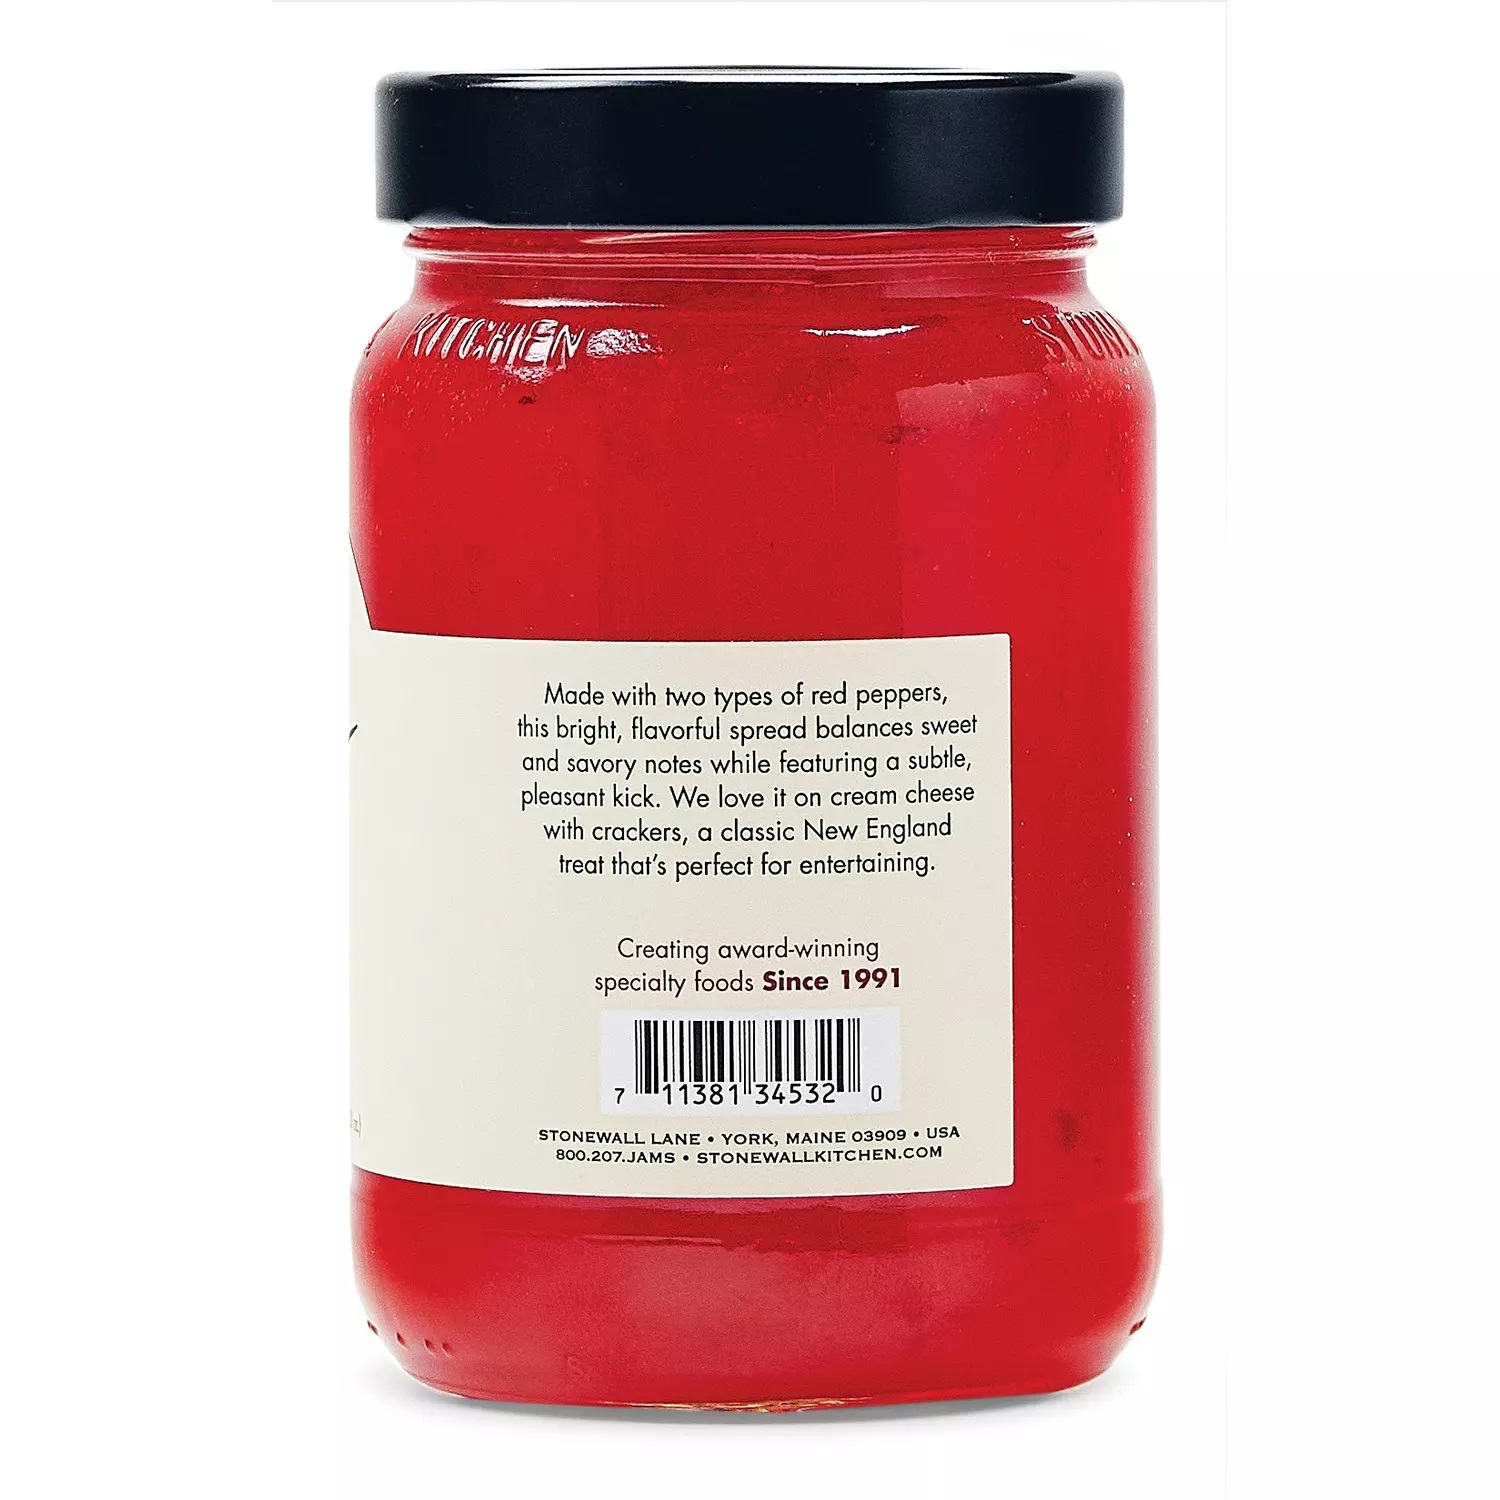 Stonewall Kitchen Red Pepper Jelly (20 Ounce)